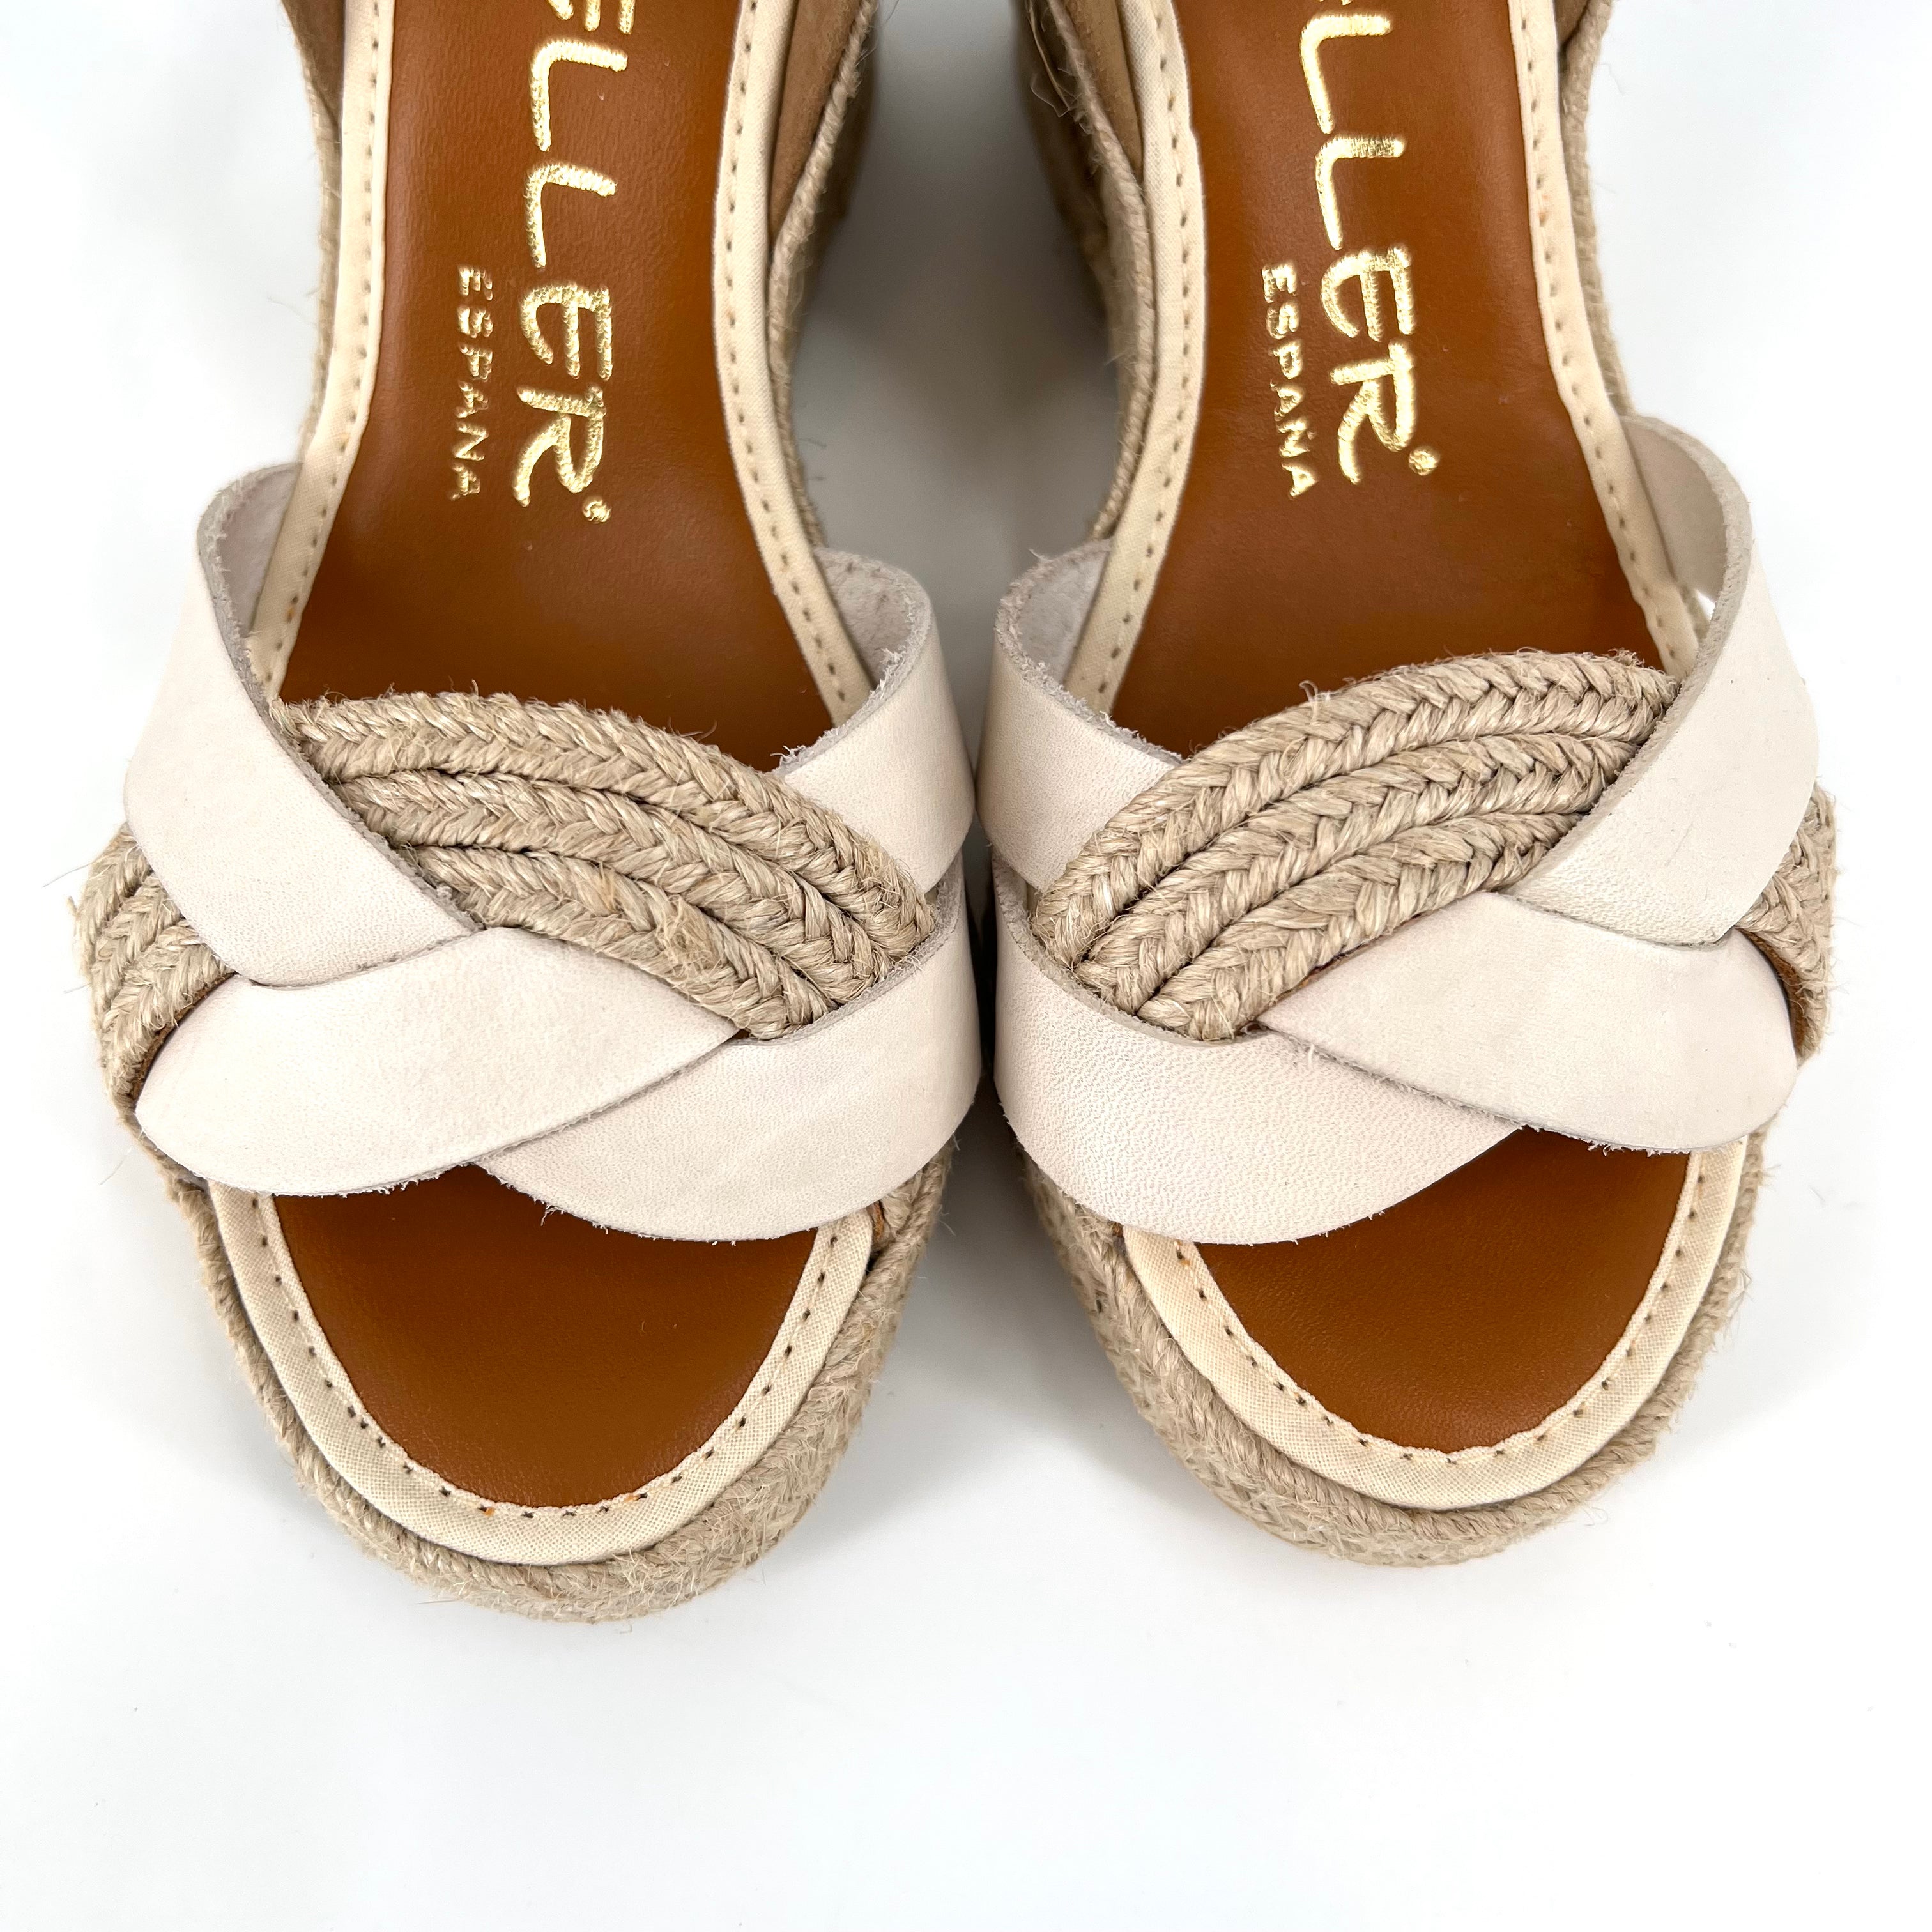 The Braided Espadrille in Off White